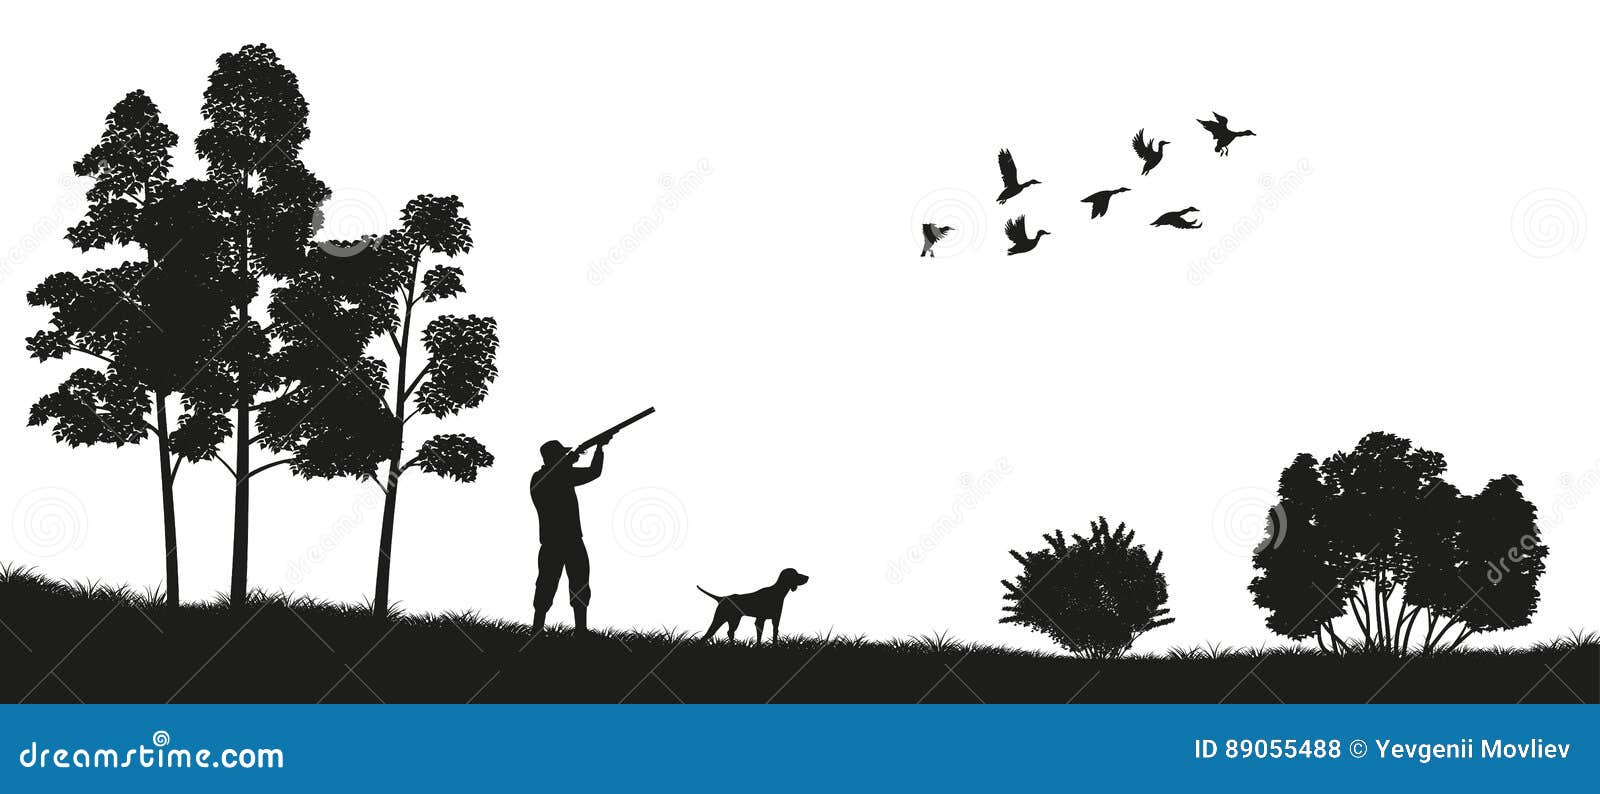 black silhouette of a hunter with a dog in the forest. duck hunting. landscape of wild nature